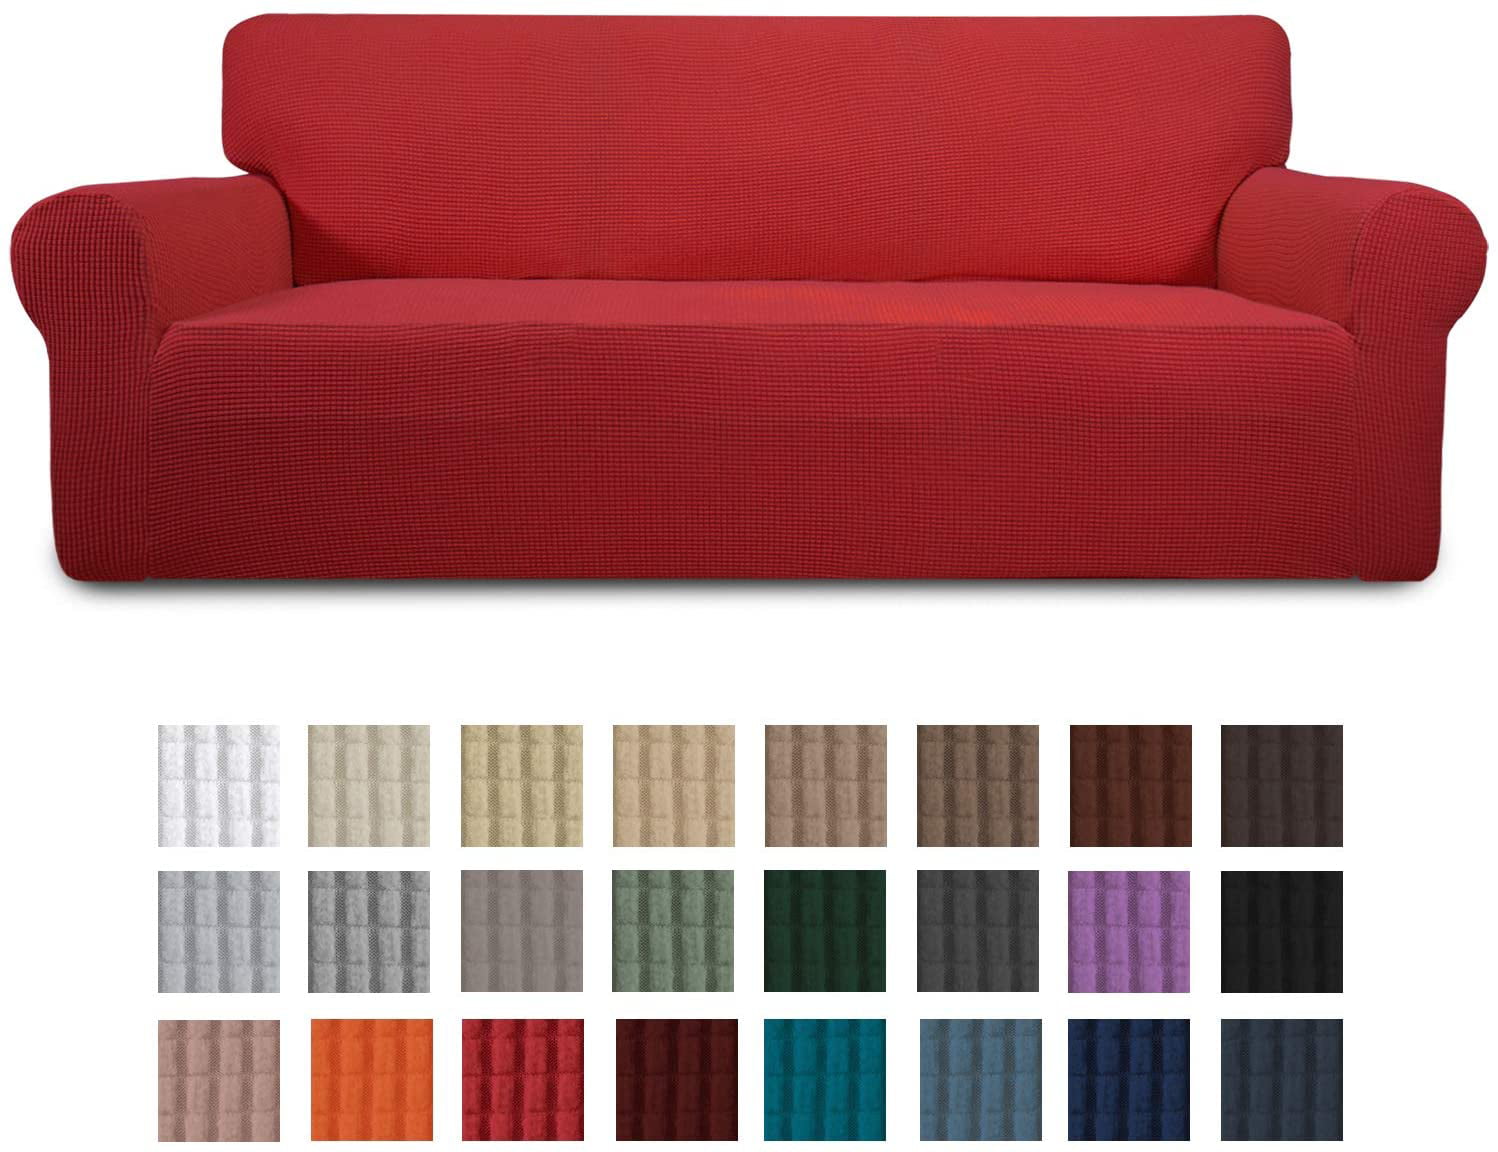 keten Groenteboer Baan Easy-Going Stretch Oversized Sofa Slipcover 1-Piece Couch Sofa Cover  Furniture Protector Soft with Elastic Bottom for Kids, Spandex Jacquard  Fabric Small Checks(X Large,Christmas Red) - Walmart.com